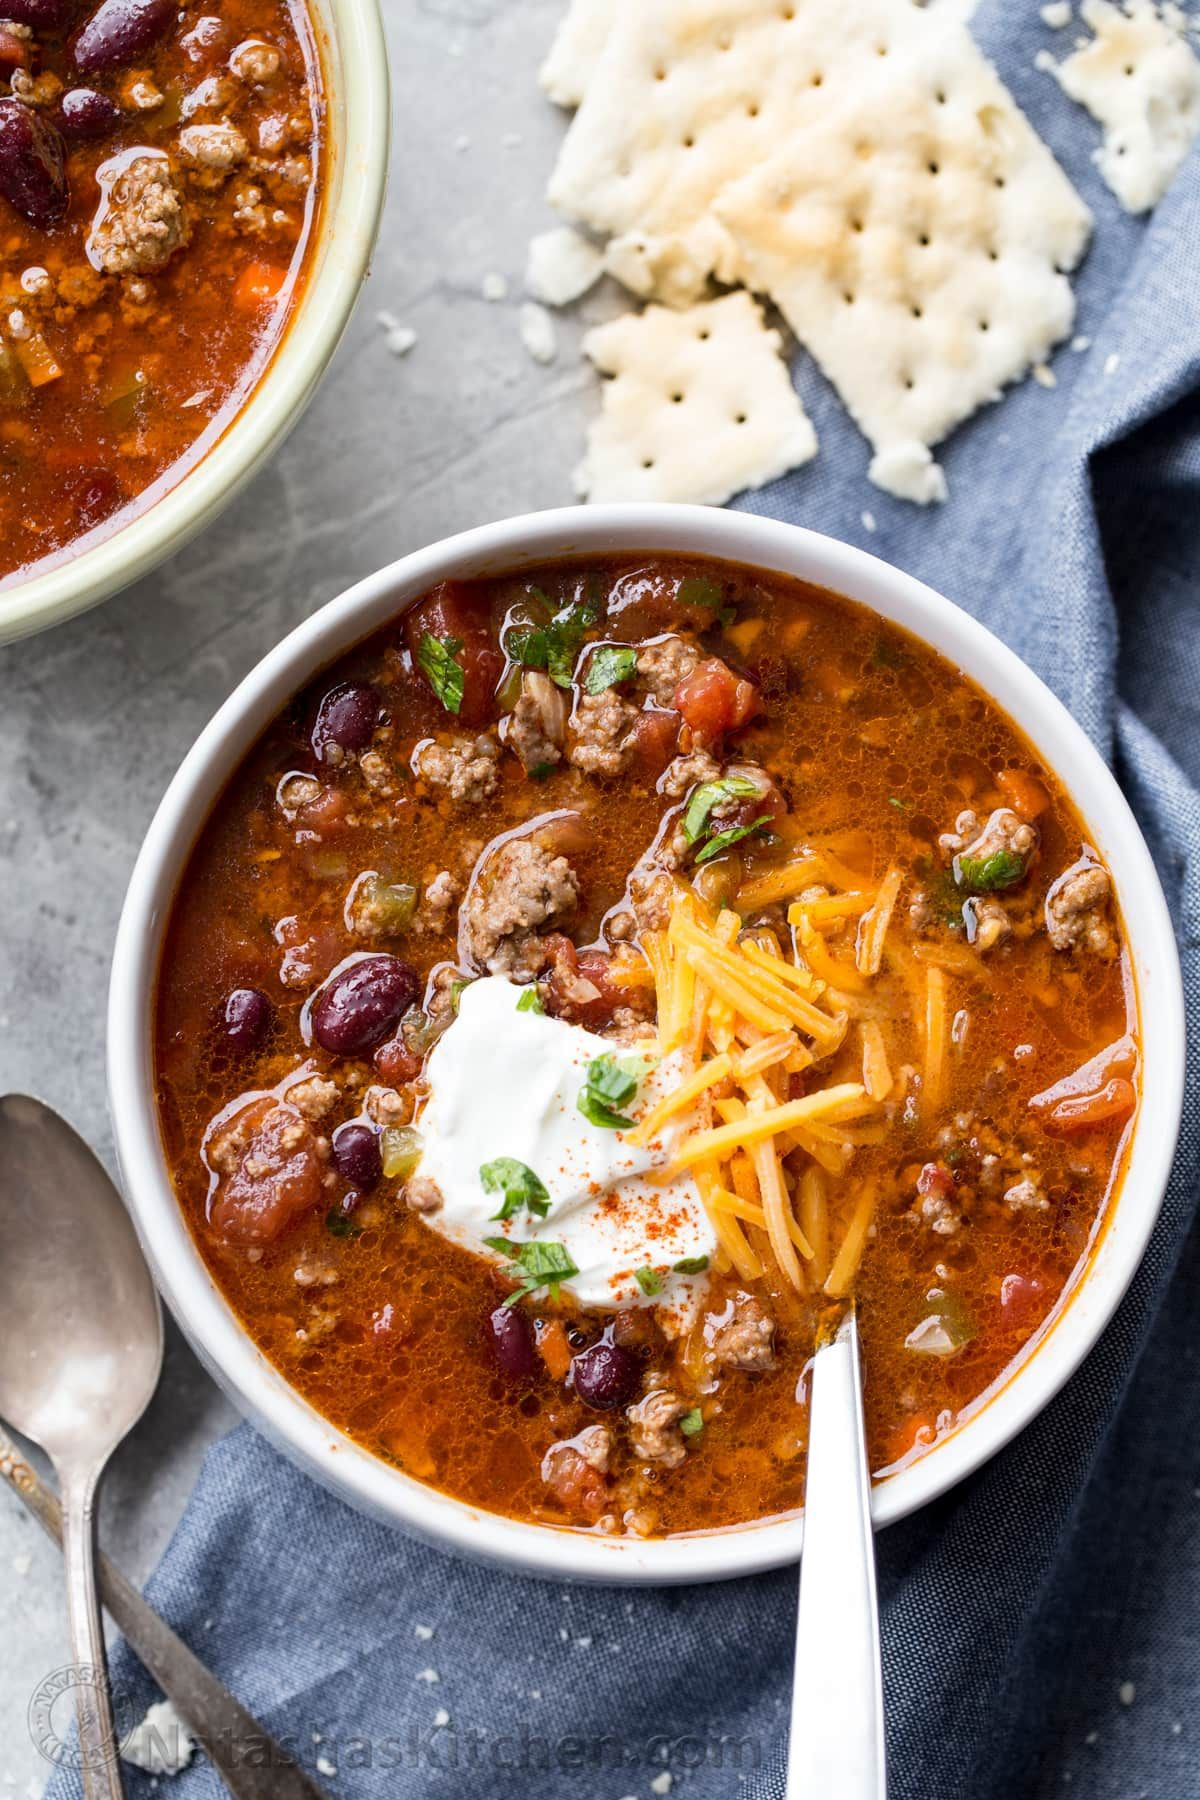 Ground Beef Chili Recipe Stovetop
 Hearty Beef Chili Recipe with tender ground beef